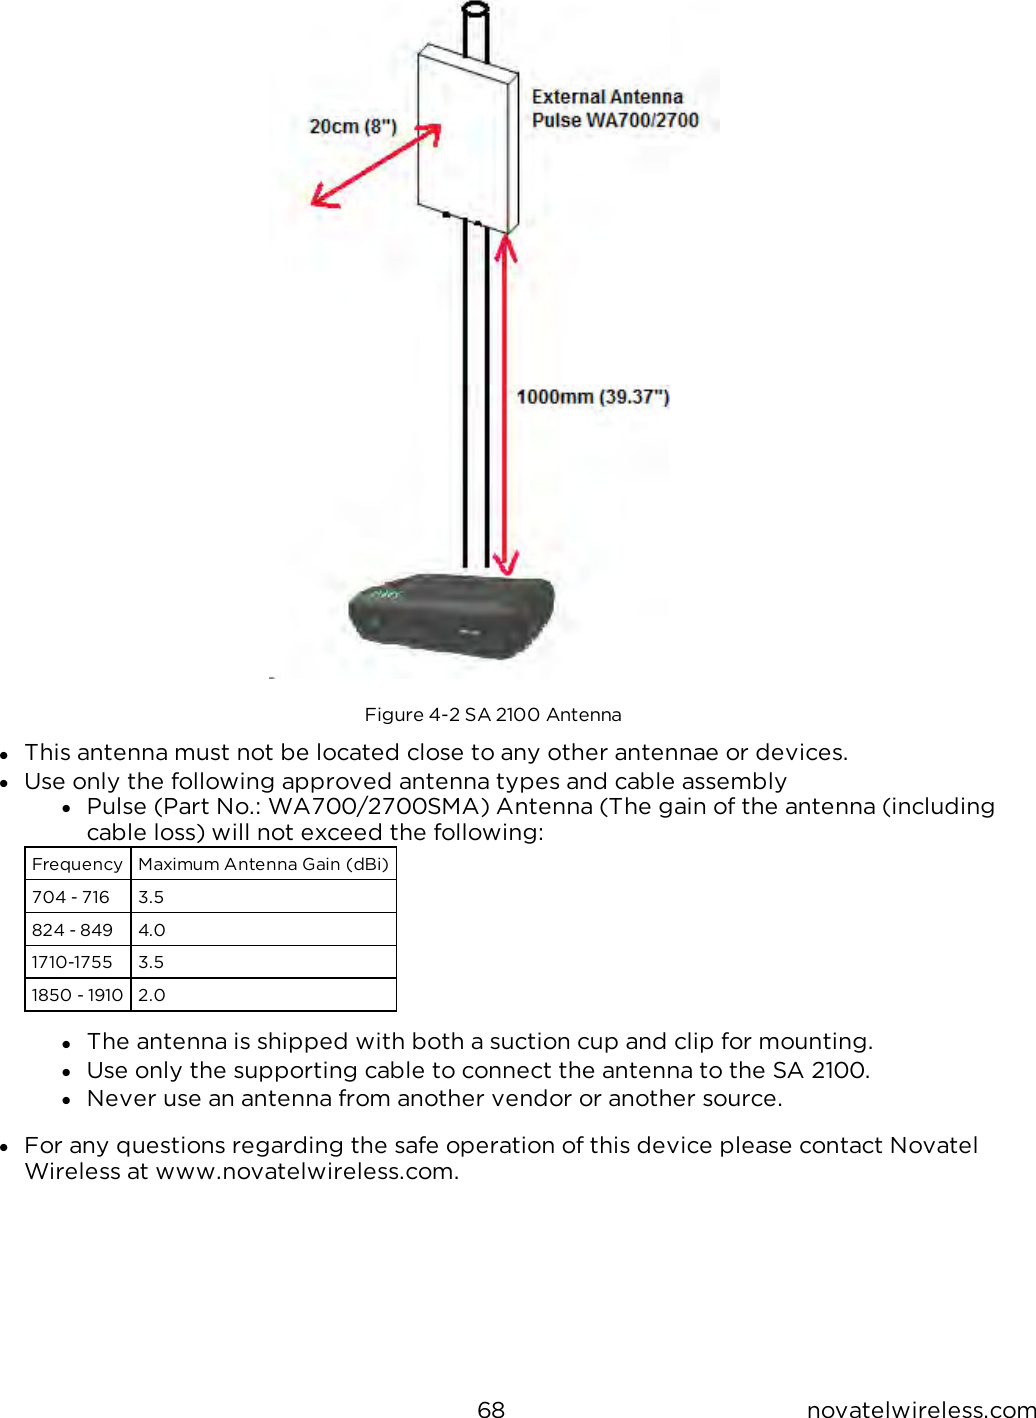 68 novatelwireless.comFigure 4-2 SA 2100 AntennalThis antenna must not be located close to any other antennae or devices.lUse only the following approved antenna types and cable assemblylPulse (Part No.: WA700/2700SMA) Antenna (The gain of the antenna (includingcable loss) will not exceed the following:Frequency Maximum Antenna Gain (dBi)704 - 716 3.5824 - 849 4.01710-1755 3.51850 - 1910 2.0lThe antenna is shipped with both a suction cup and clip for mounting.lUse only the supporting cable to connect the antenna to the SA 2100.lNever use an antenna from another vendor or another source.lFor any questions regarding the safe operation of this device please contact NovatelWireless at www.novatelwireless.com.